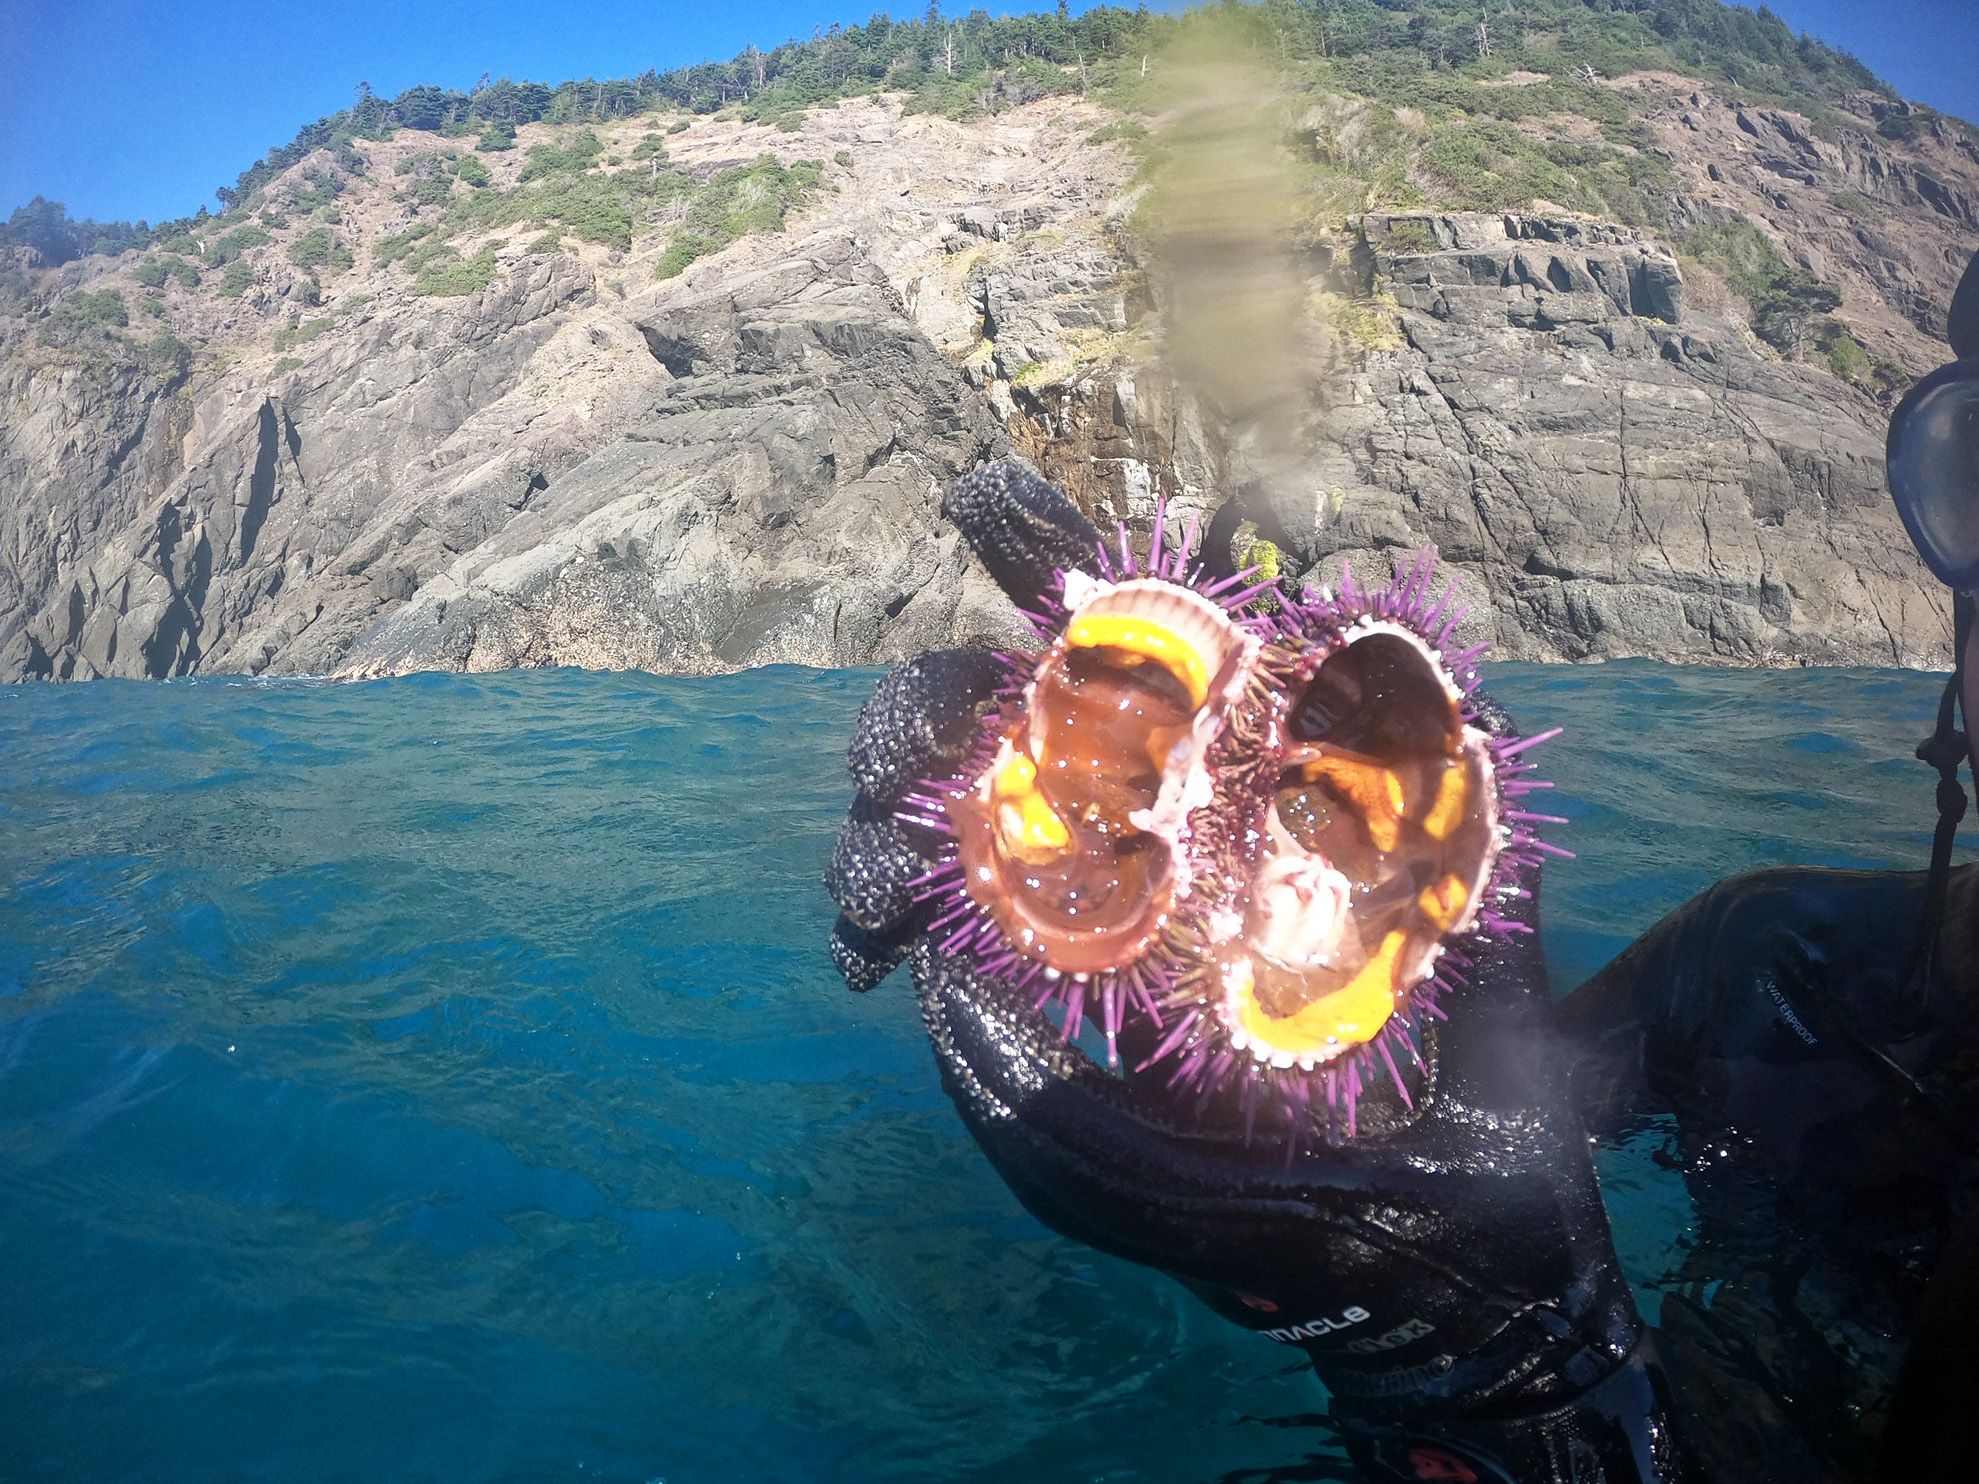 A person in a wetsuit swims in the ocean, holding a purple sea urchin that's been broken in half. The rocky coast is visible in the background.